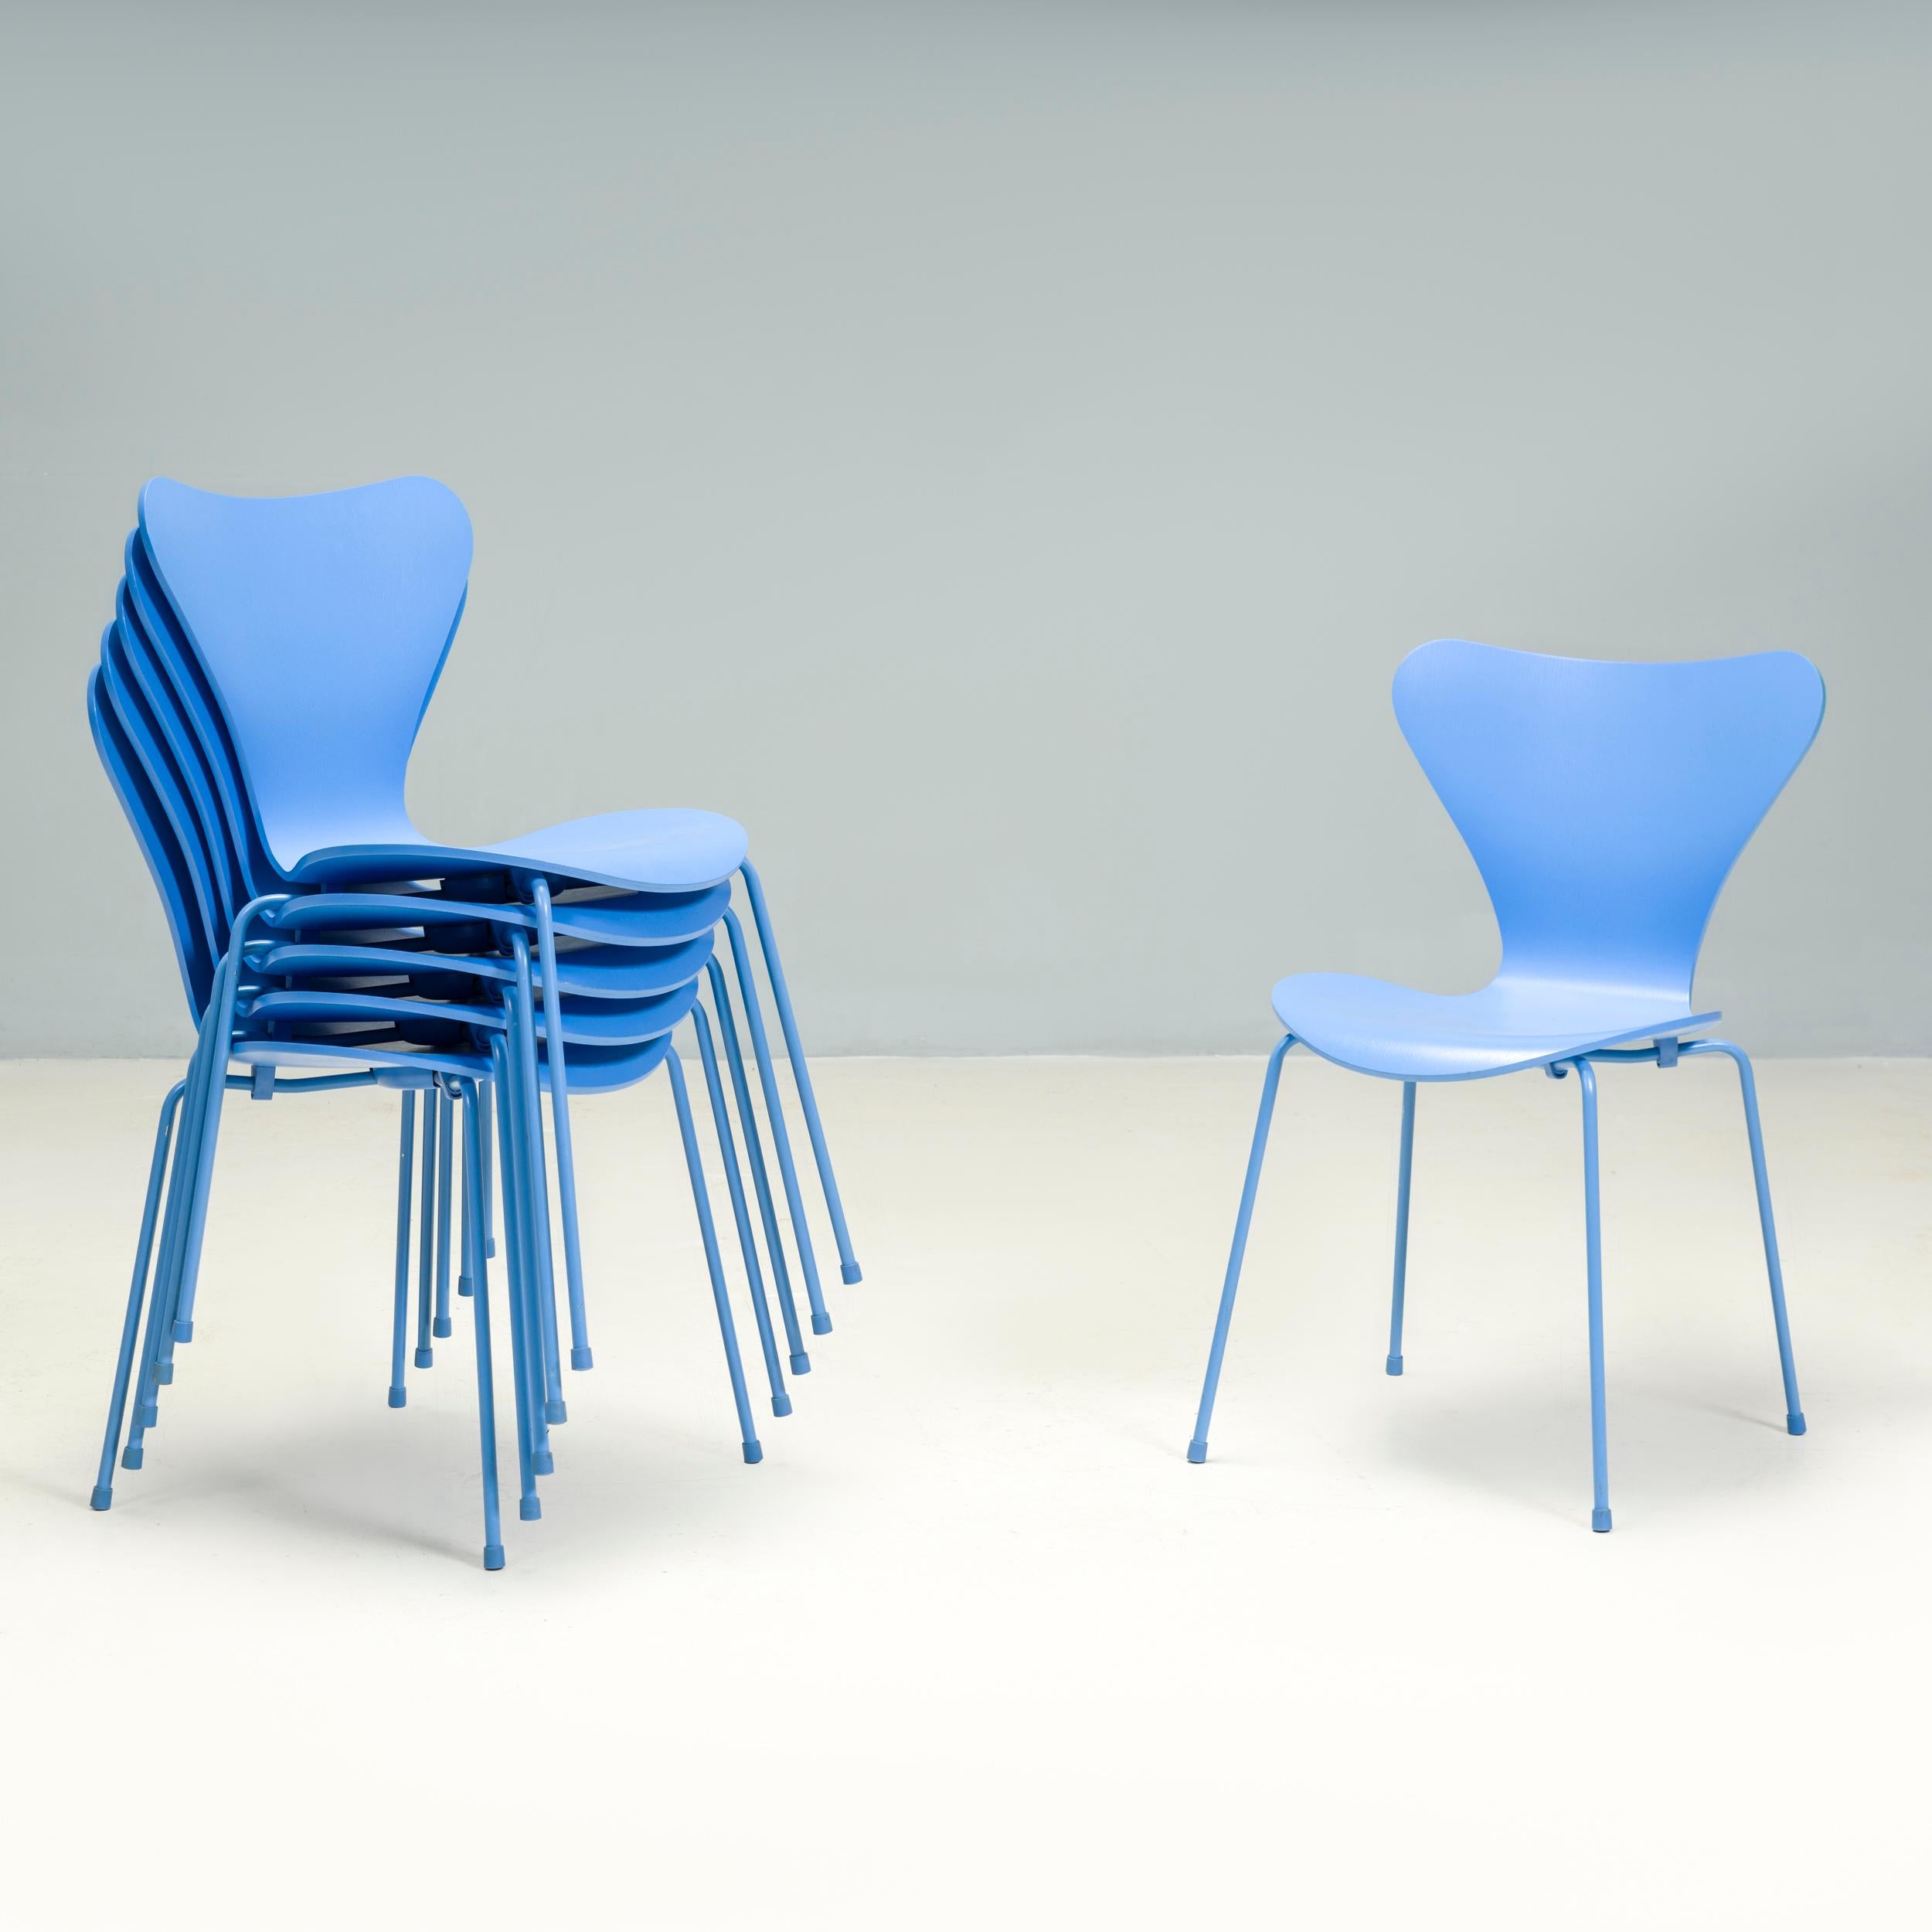 Polish  Fritz Hansen by Arne Jacobsen Monochrome Blue Series 7 Dining Chairs, Set of 6 For Sale